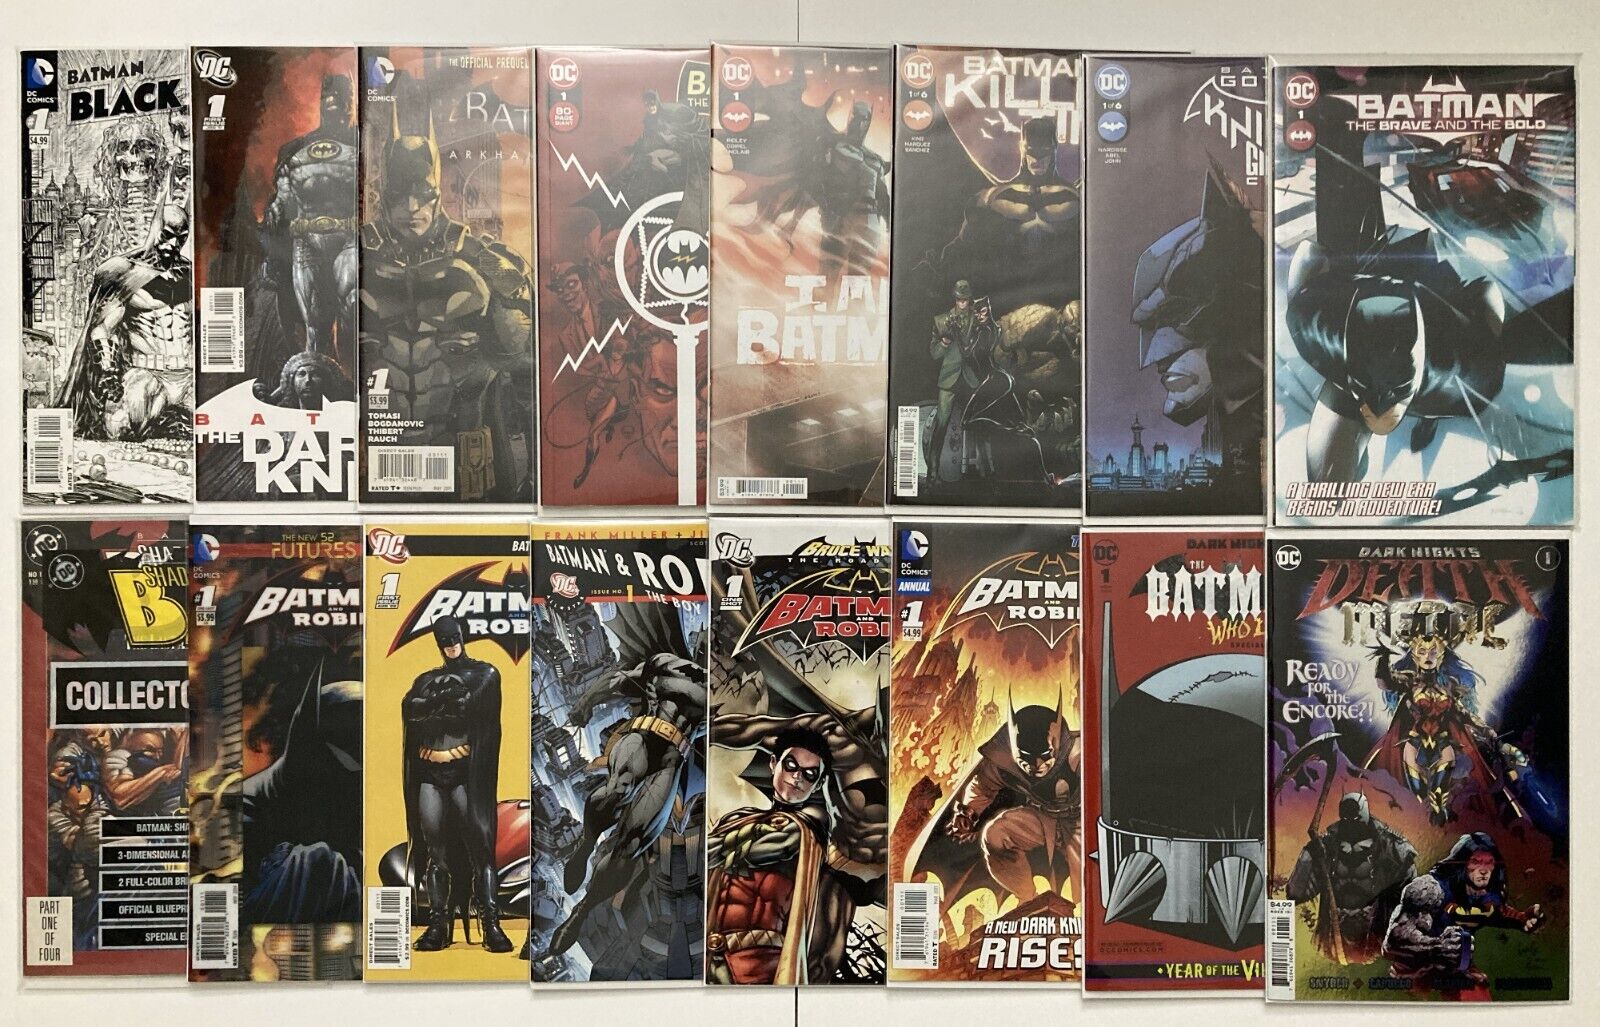 Batman #1 issues Mixed Lot. 16 Total / Bagged and Boarded. Great Condition